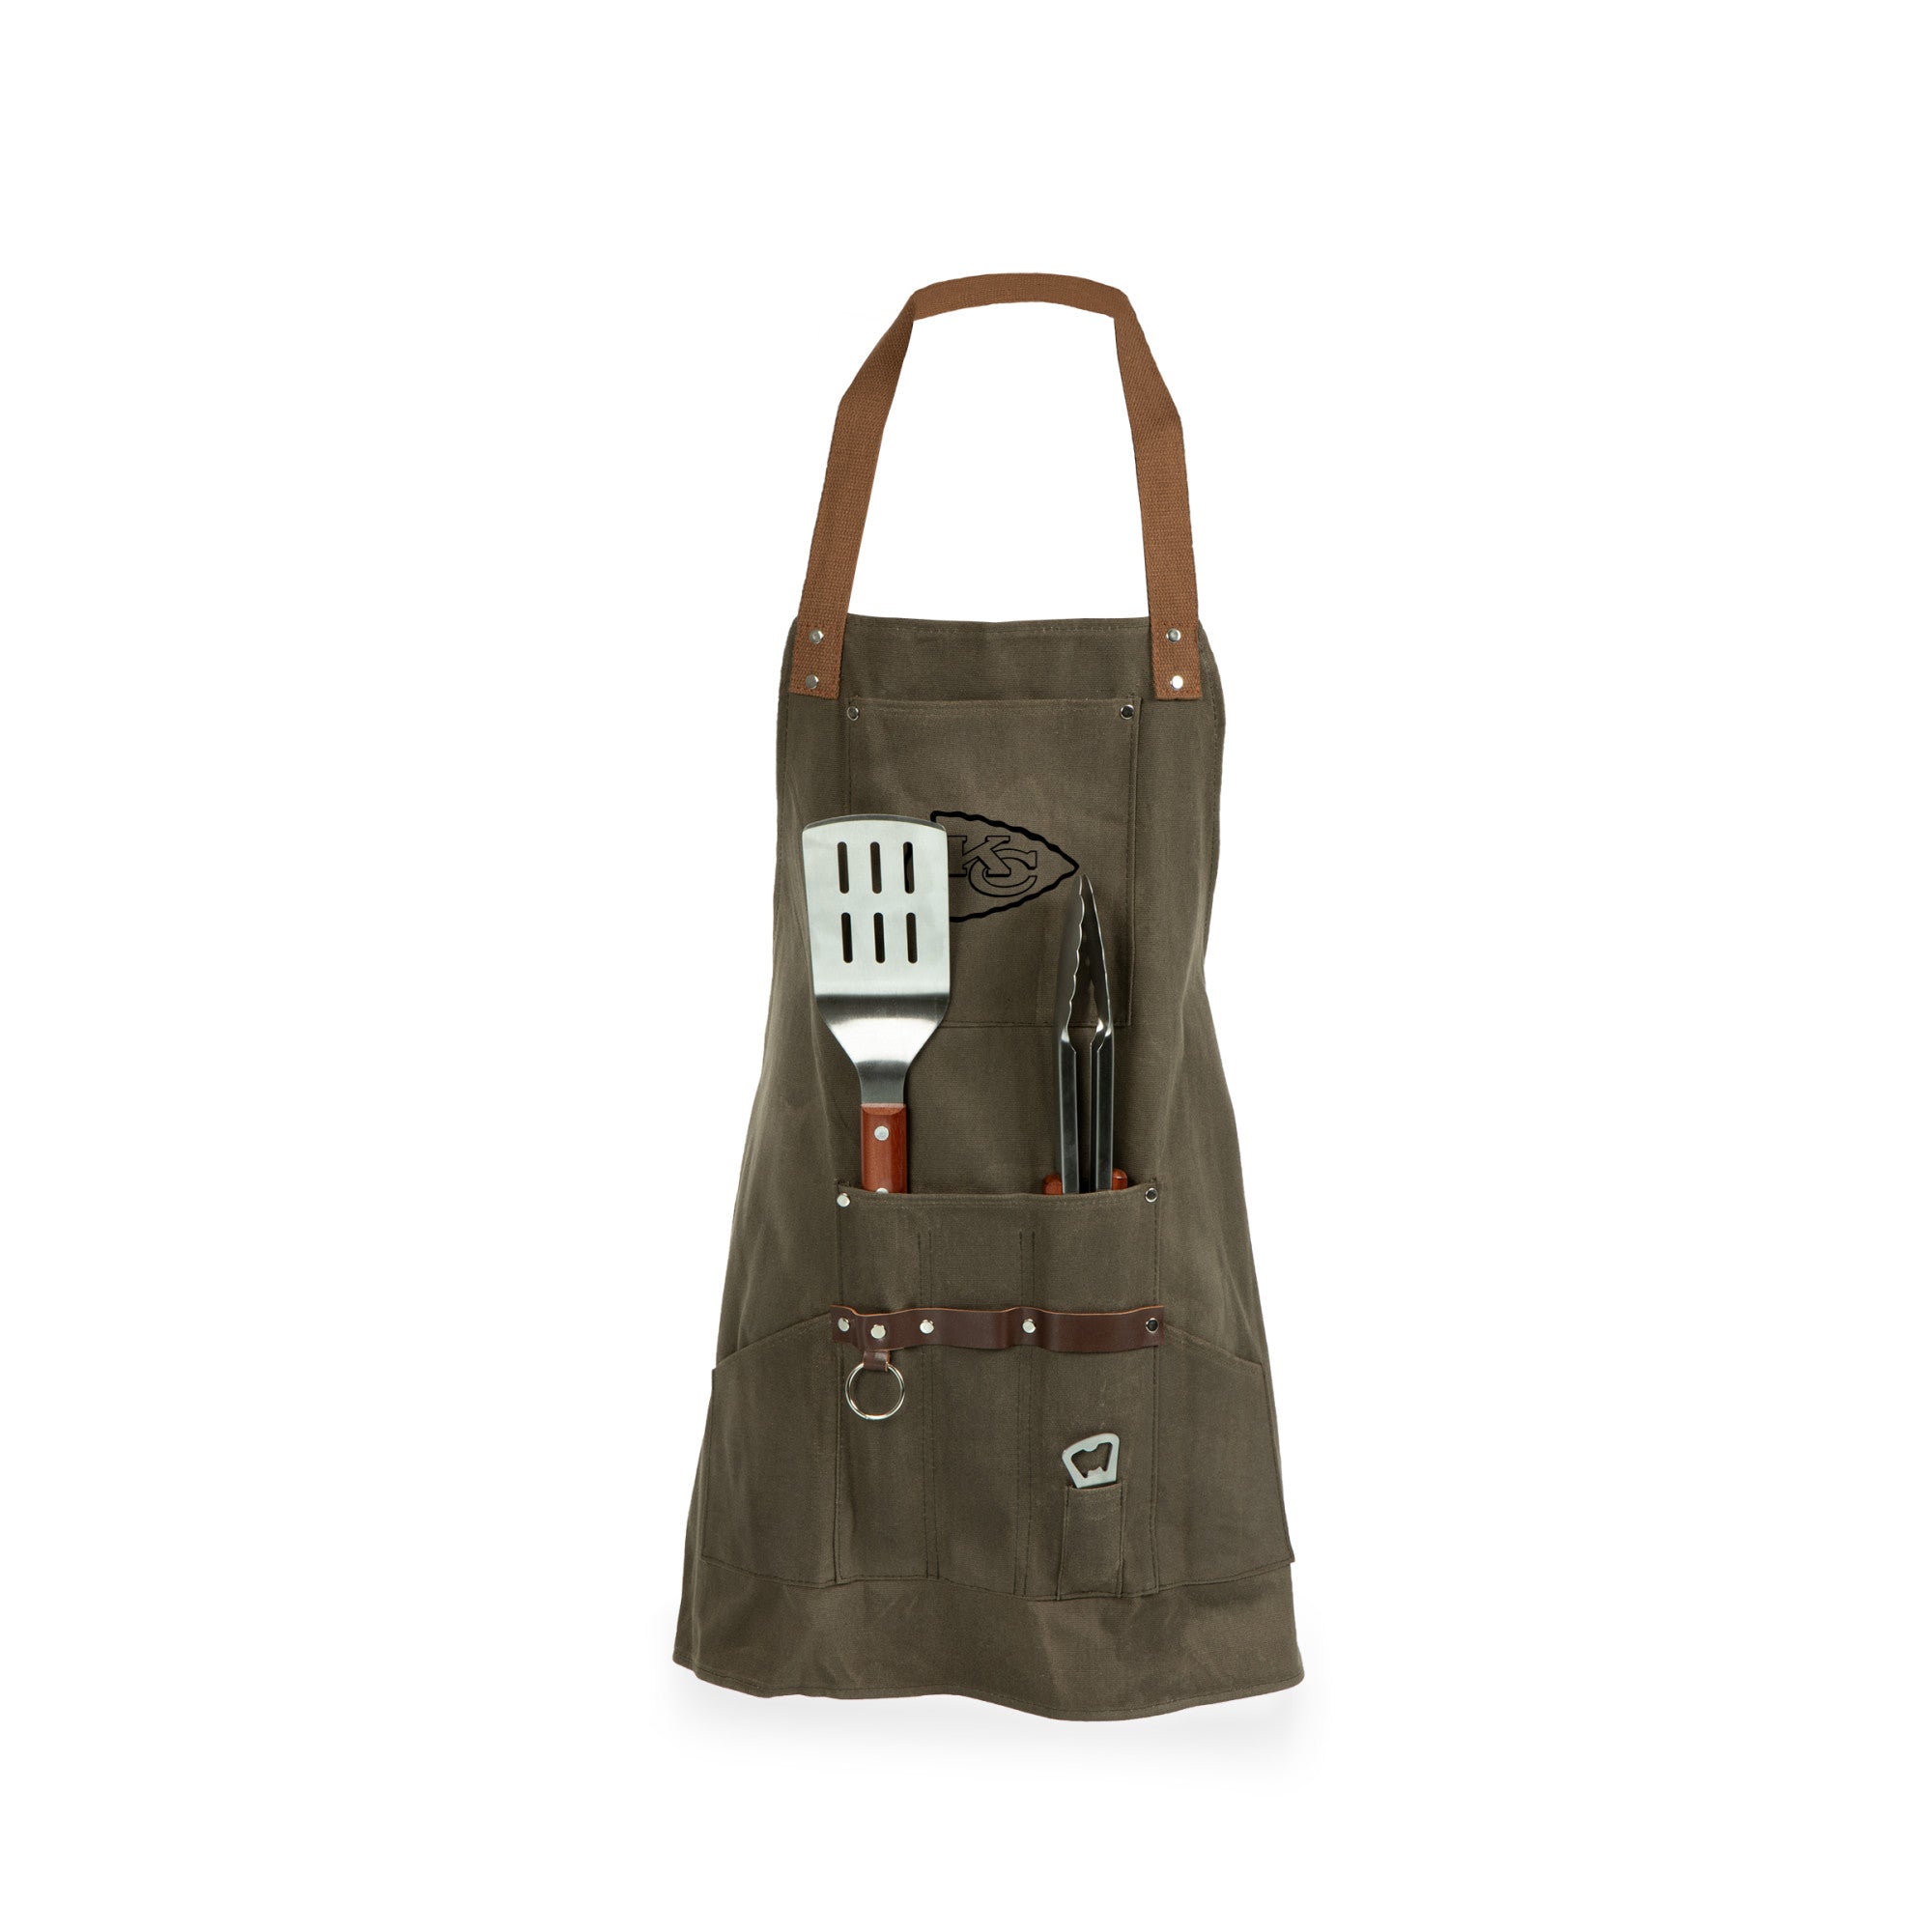 Kansas City Chiefs - BBQ Apron with Tools & Bottle Opener, (Khaki Green with Beige Accents)